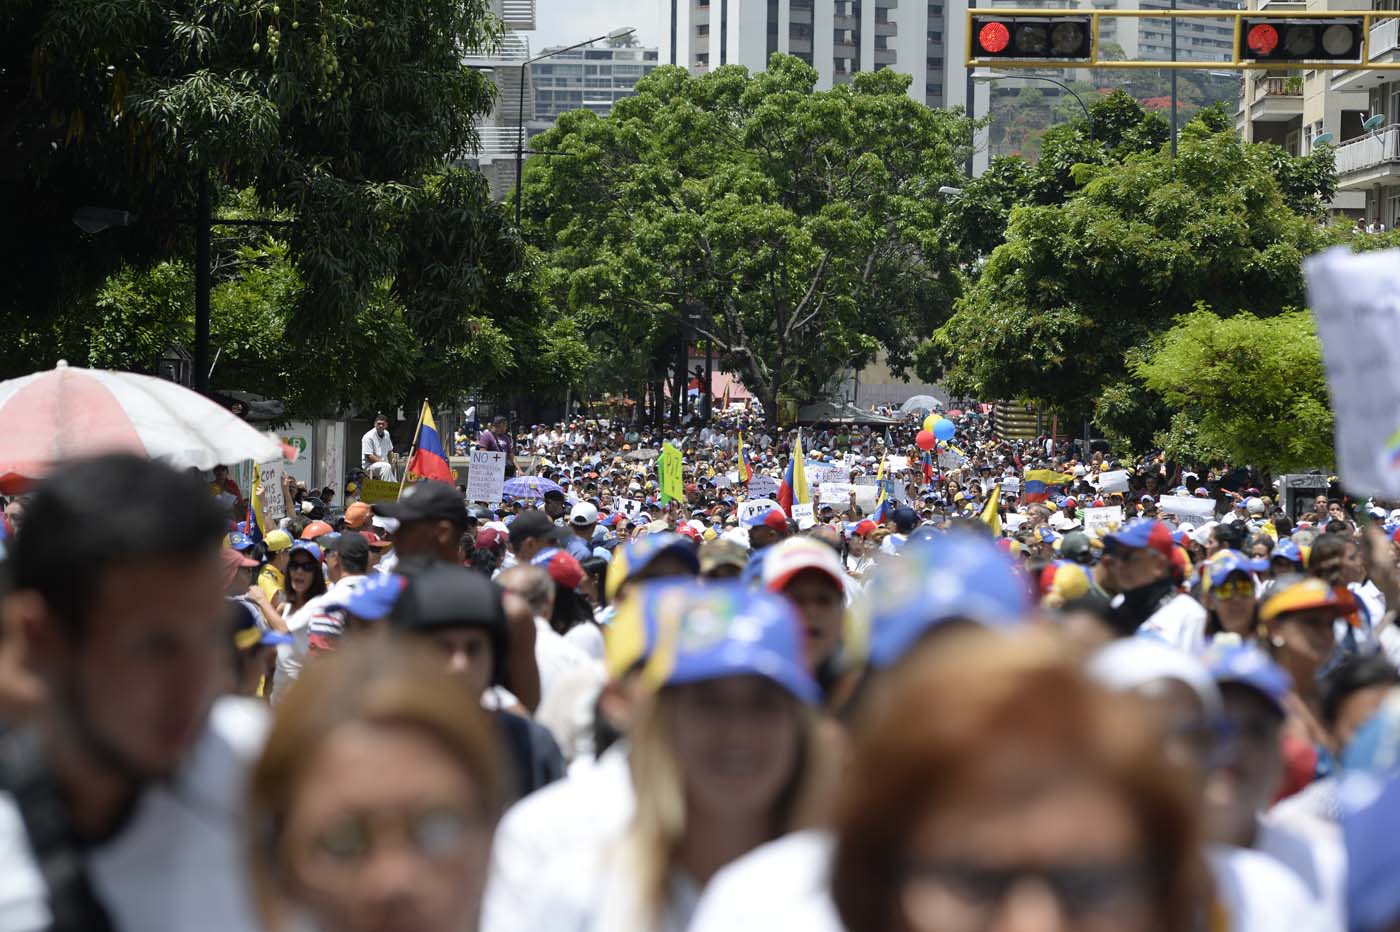 Venezuelan opposition activists take part in a women's march aimed to keep pressure on President Nicolas Maduro, whose authority is being increasingly challenged by protests and deadly unrest, in Caracas on May 6, 2017. The death toll since April, when the protests intensified after Maduro's administration and the courts stepped up efforts to undermine the opposition, is at least 36 according to prosecutors. / AFP PHOTO / FEDERICO PARRA